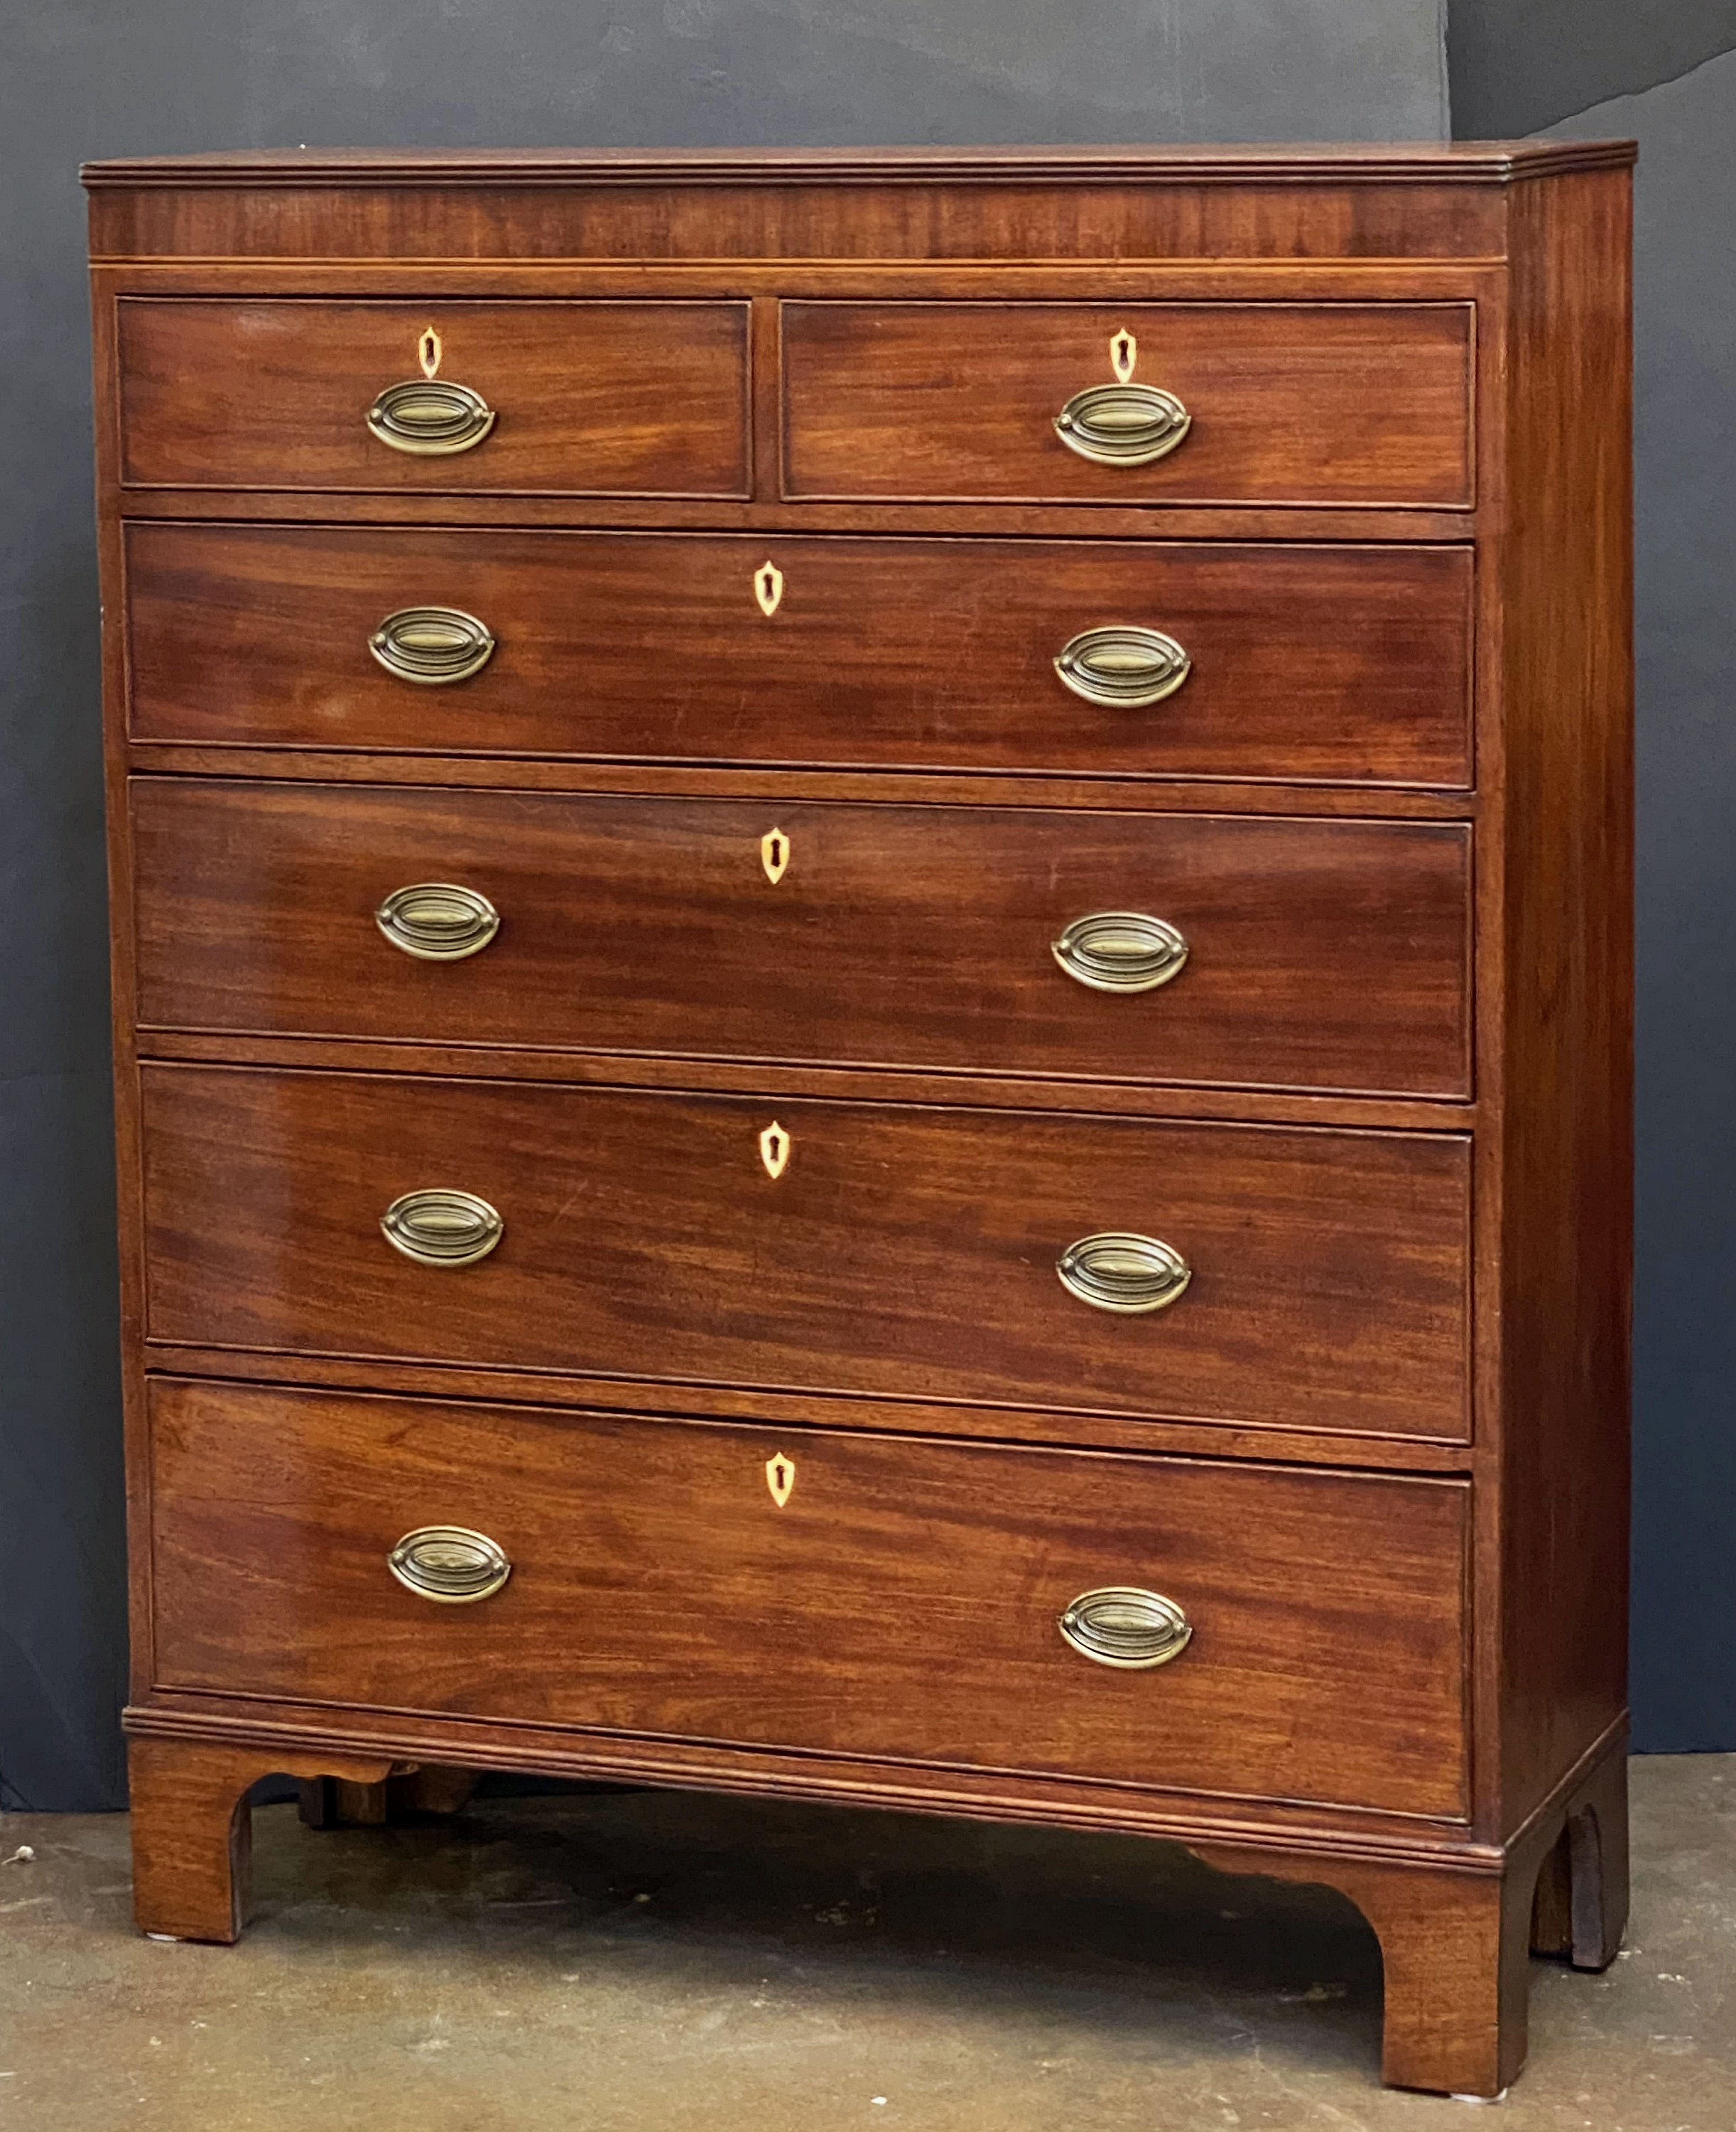 Metal English Tall Chest or High Chest of Drawers of Mahogany